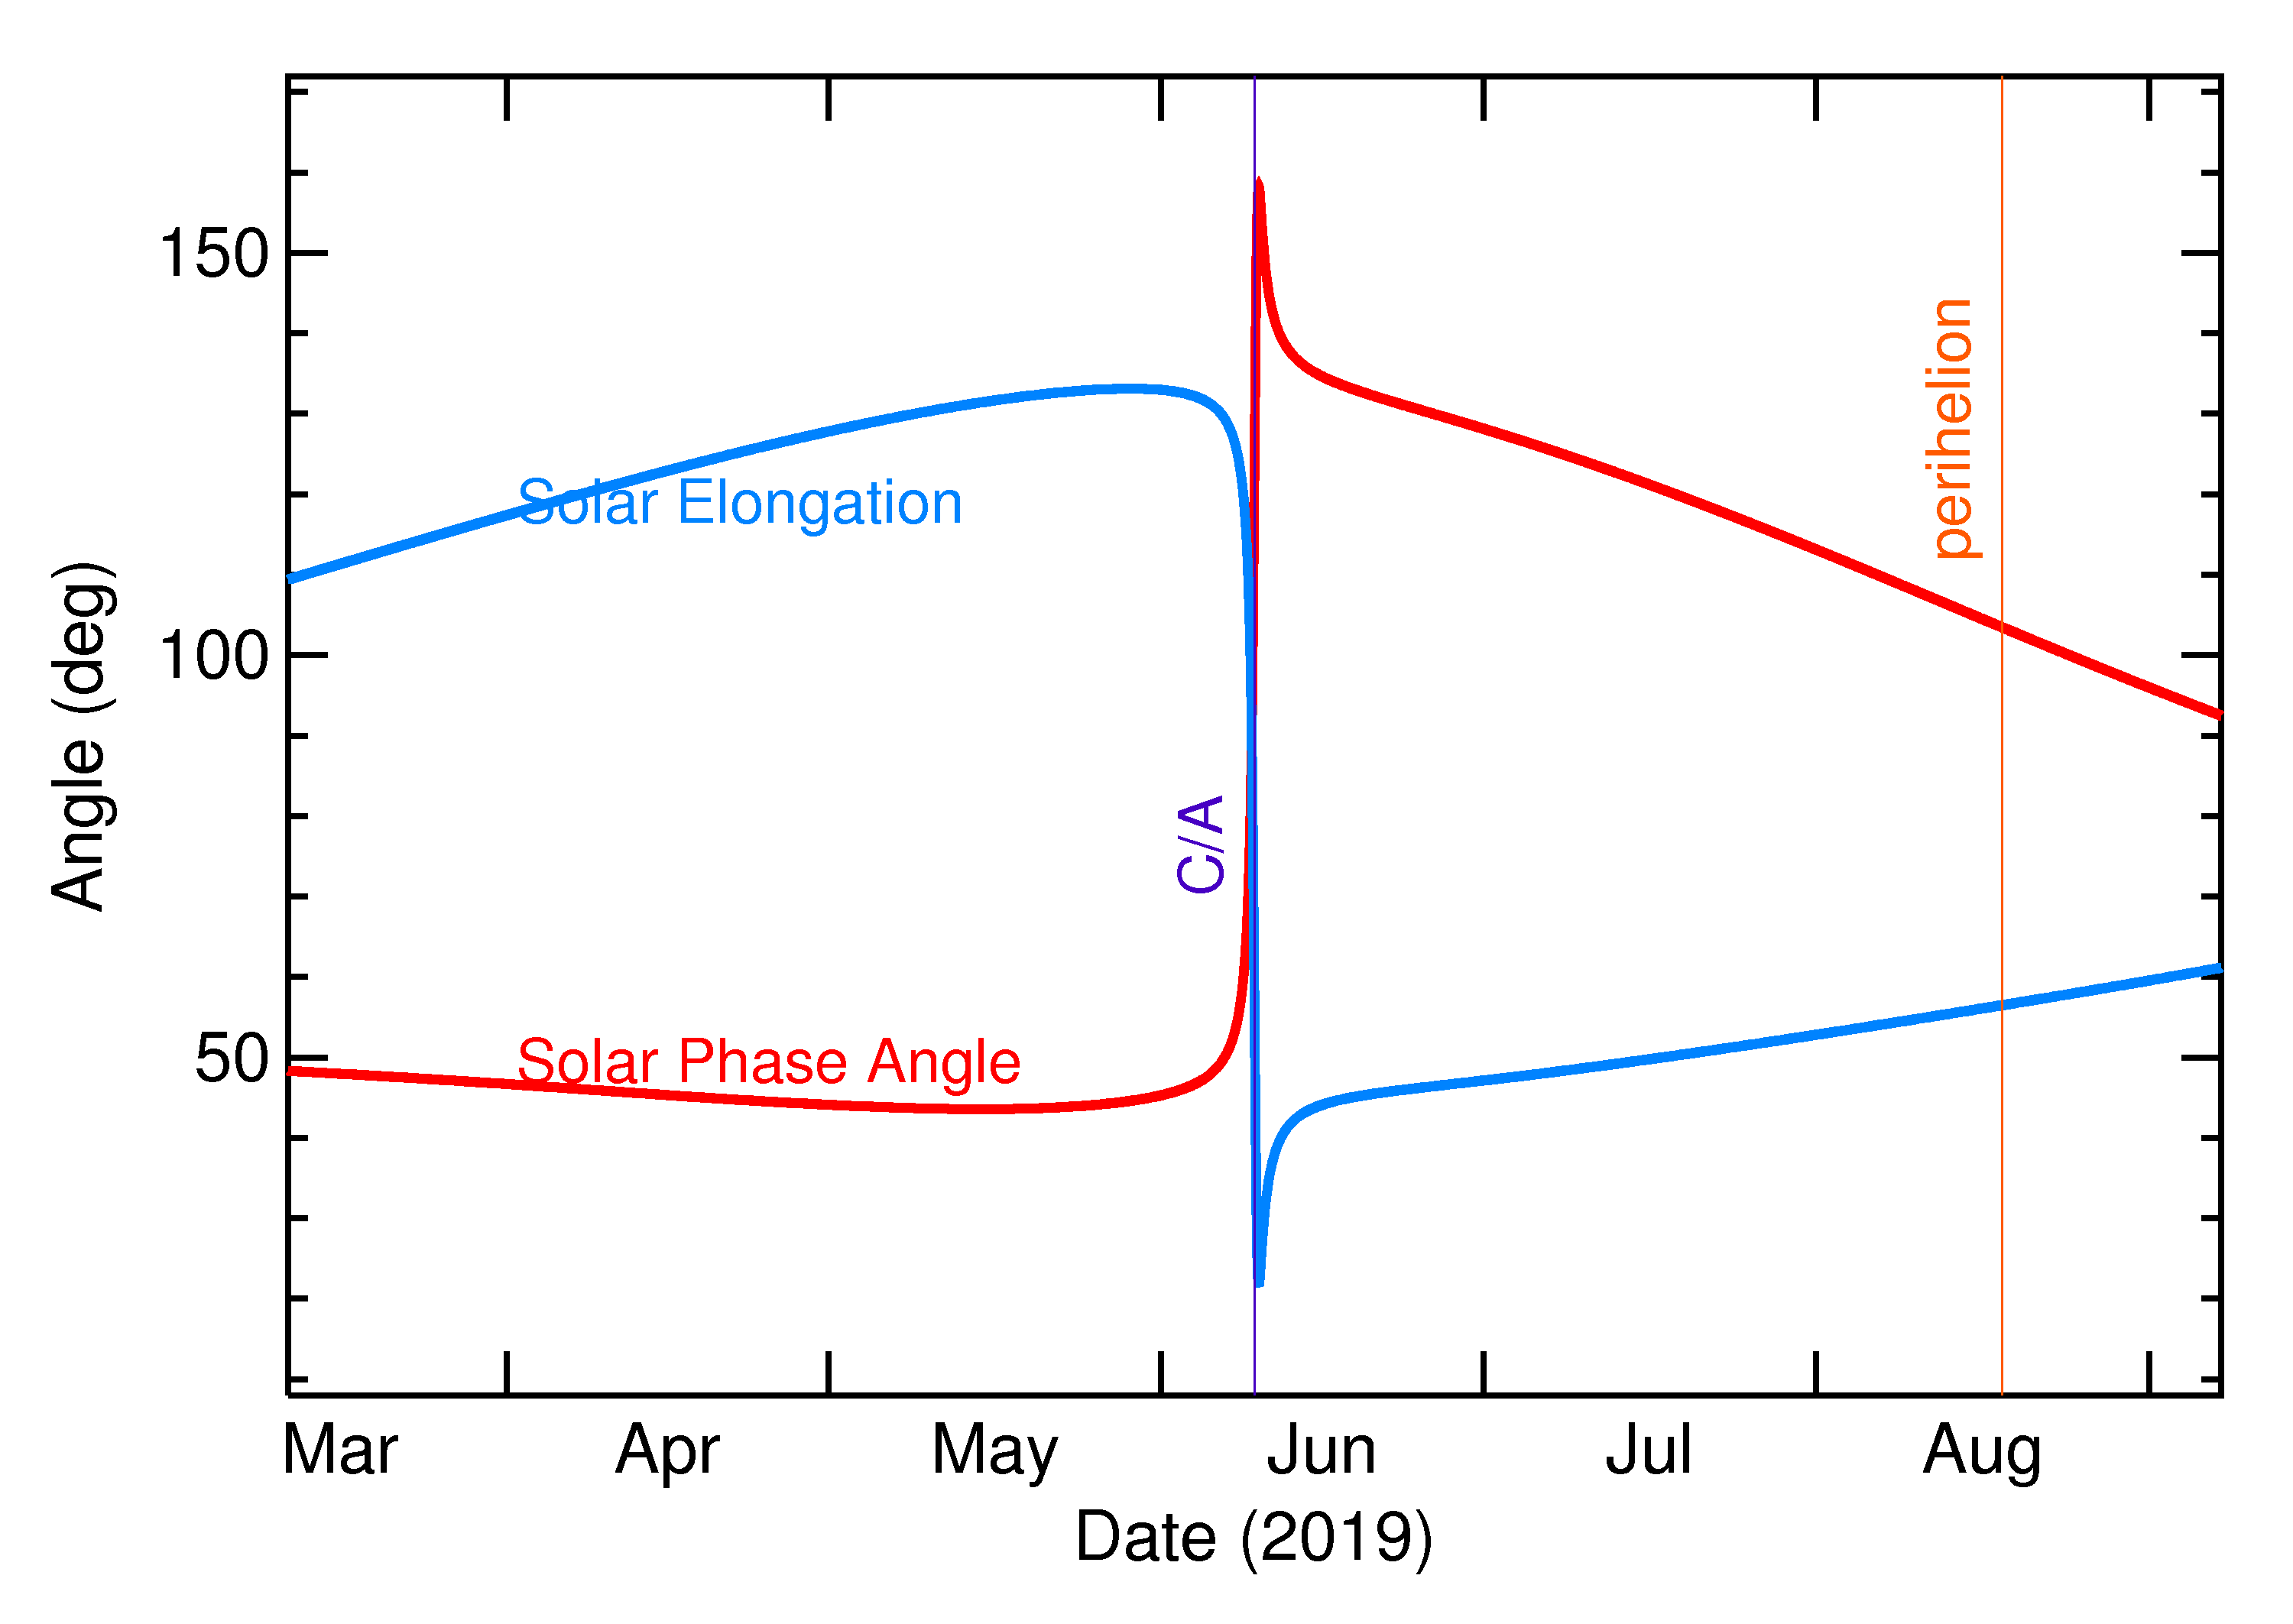 Solar Elongation and Solar Phase Angle of 2019 LW4 in the months around closest approach